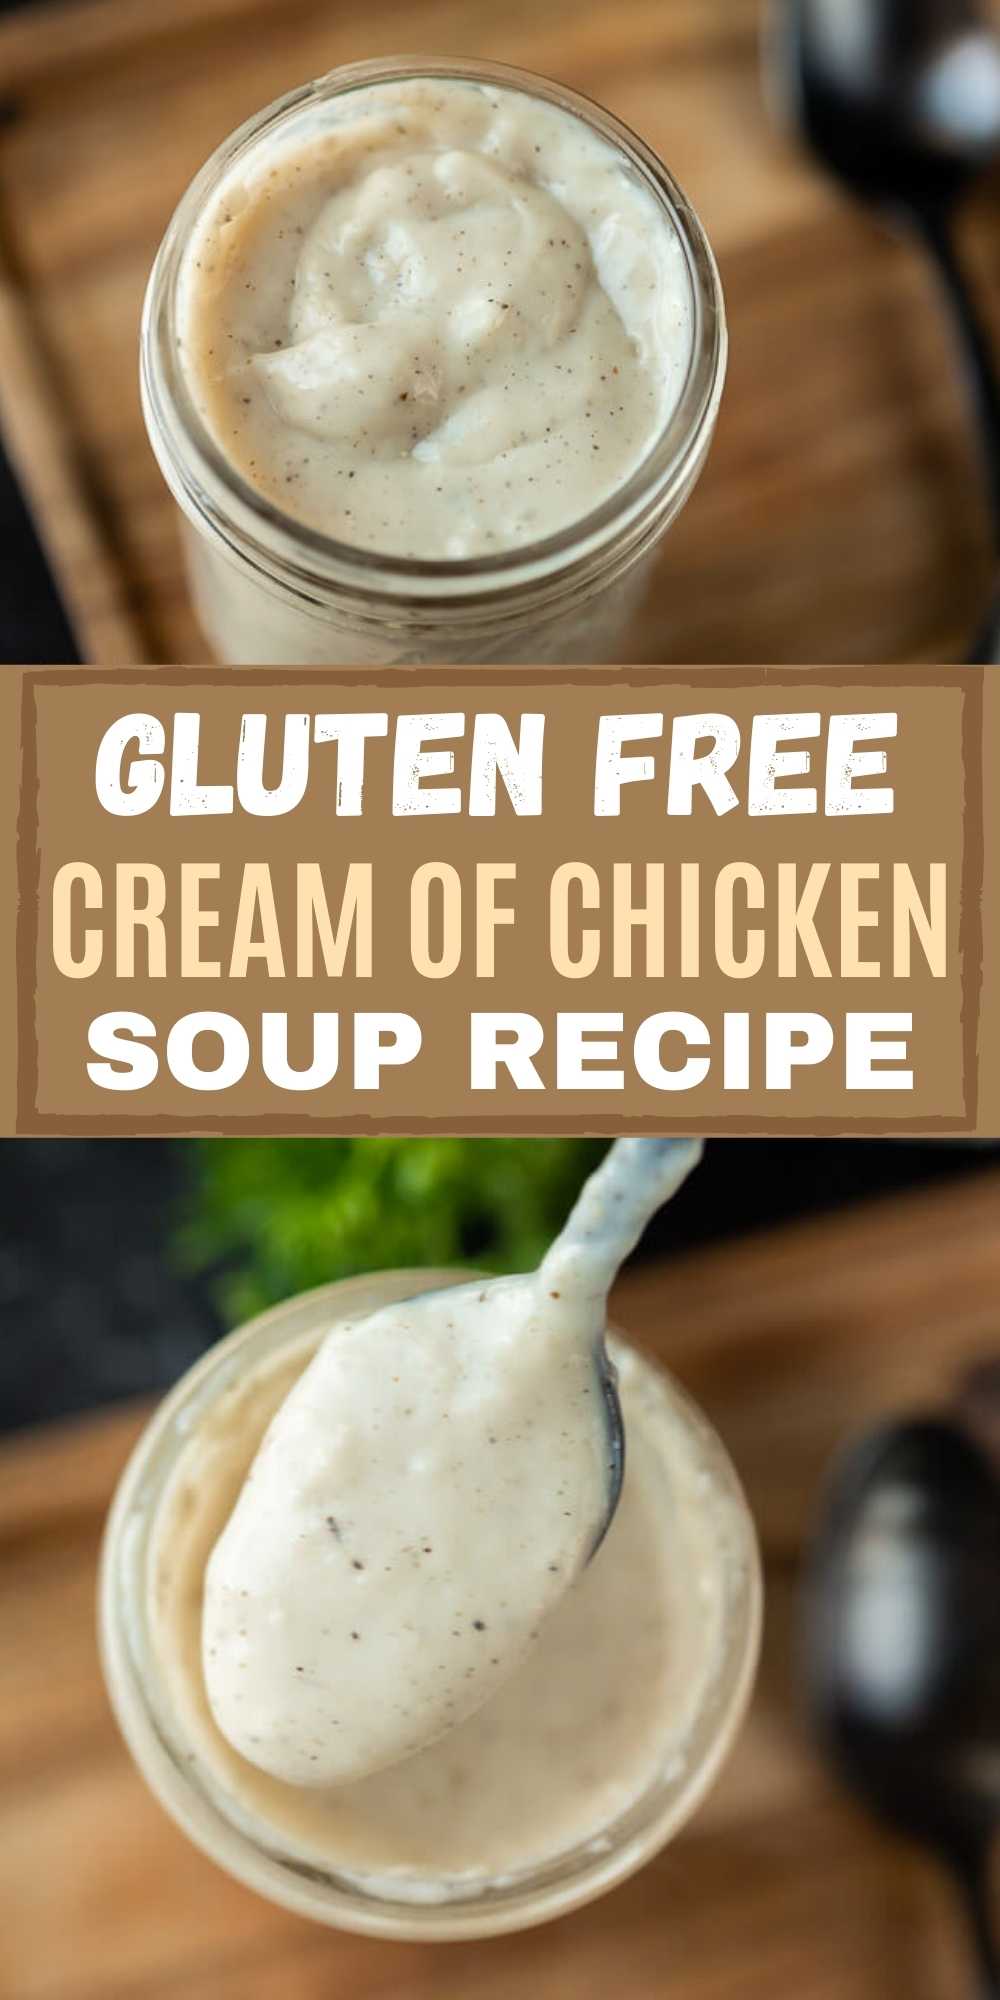 This Cream of Chicken Soup is gluten free and easy to create in your kitchen. This gluten free cream of chicken soup recipe is simple to make in minutes and great for soup or for your favorite recipes! #eatingonadime #glutenfreerecipes #souprecipes 
